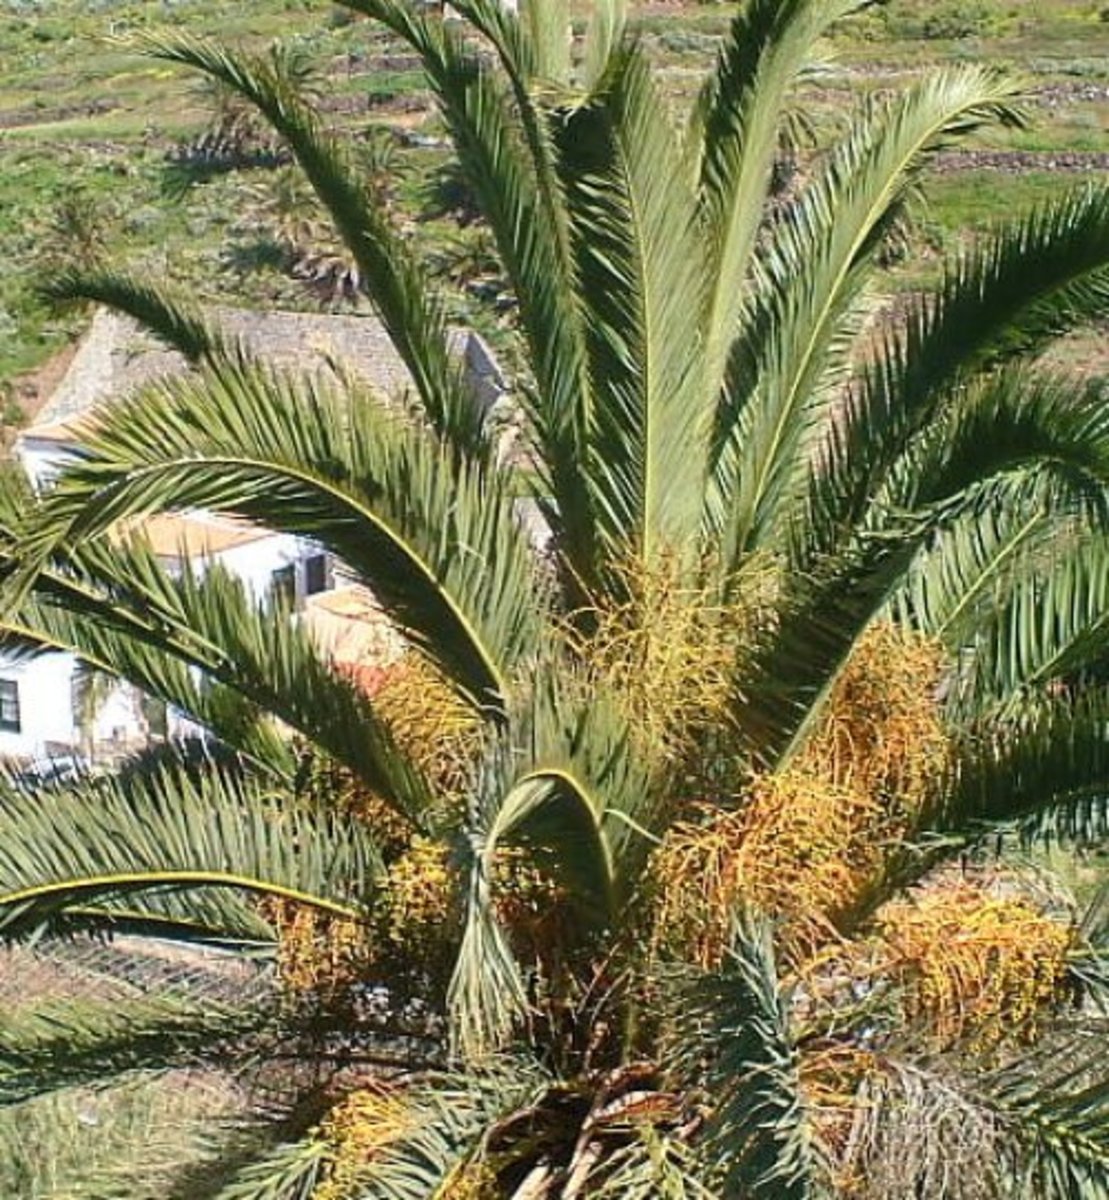 Canary Date Palm. Photo by Steve Andrews